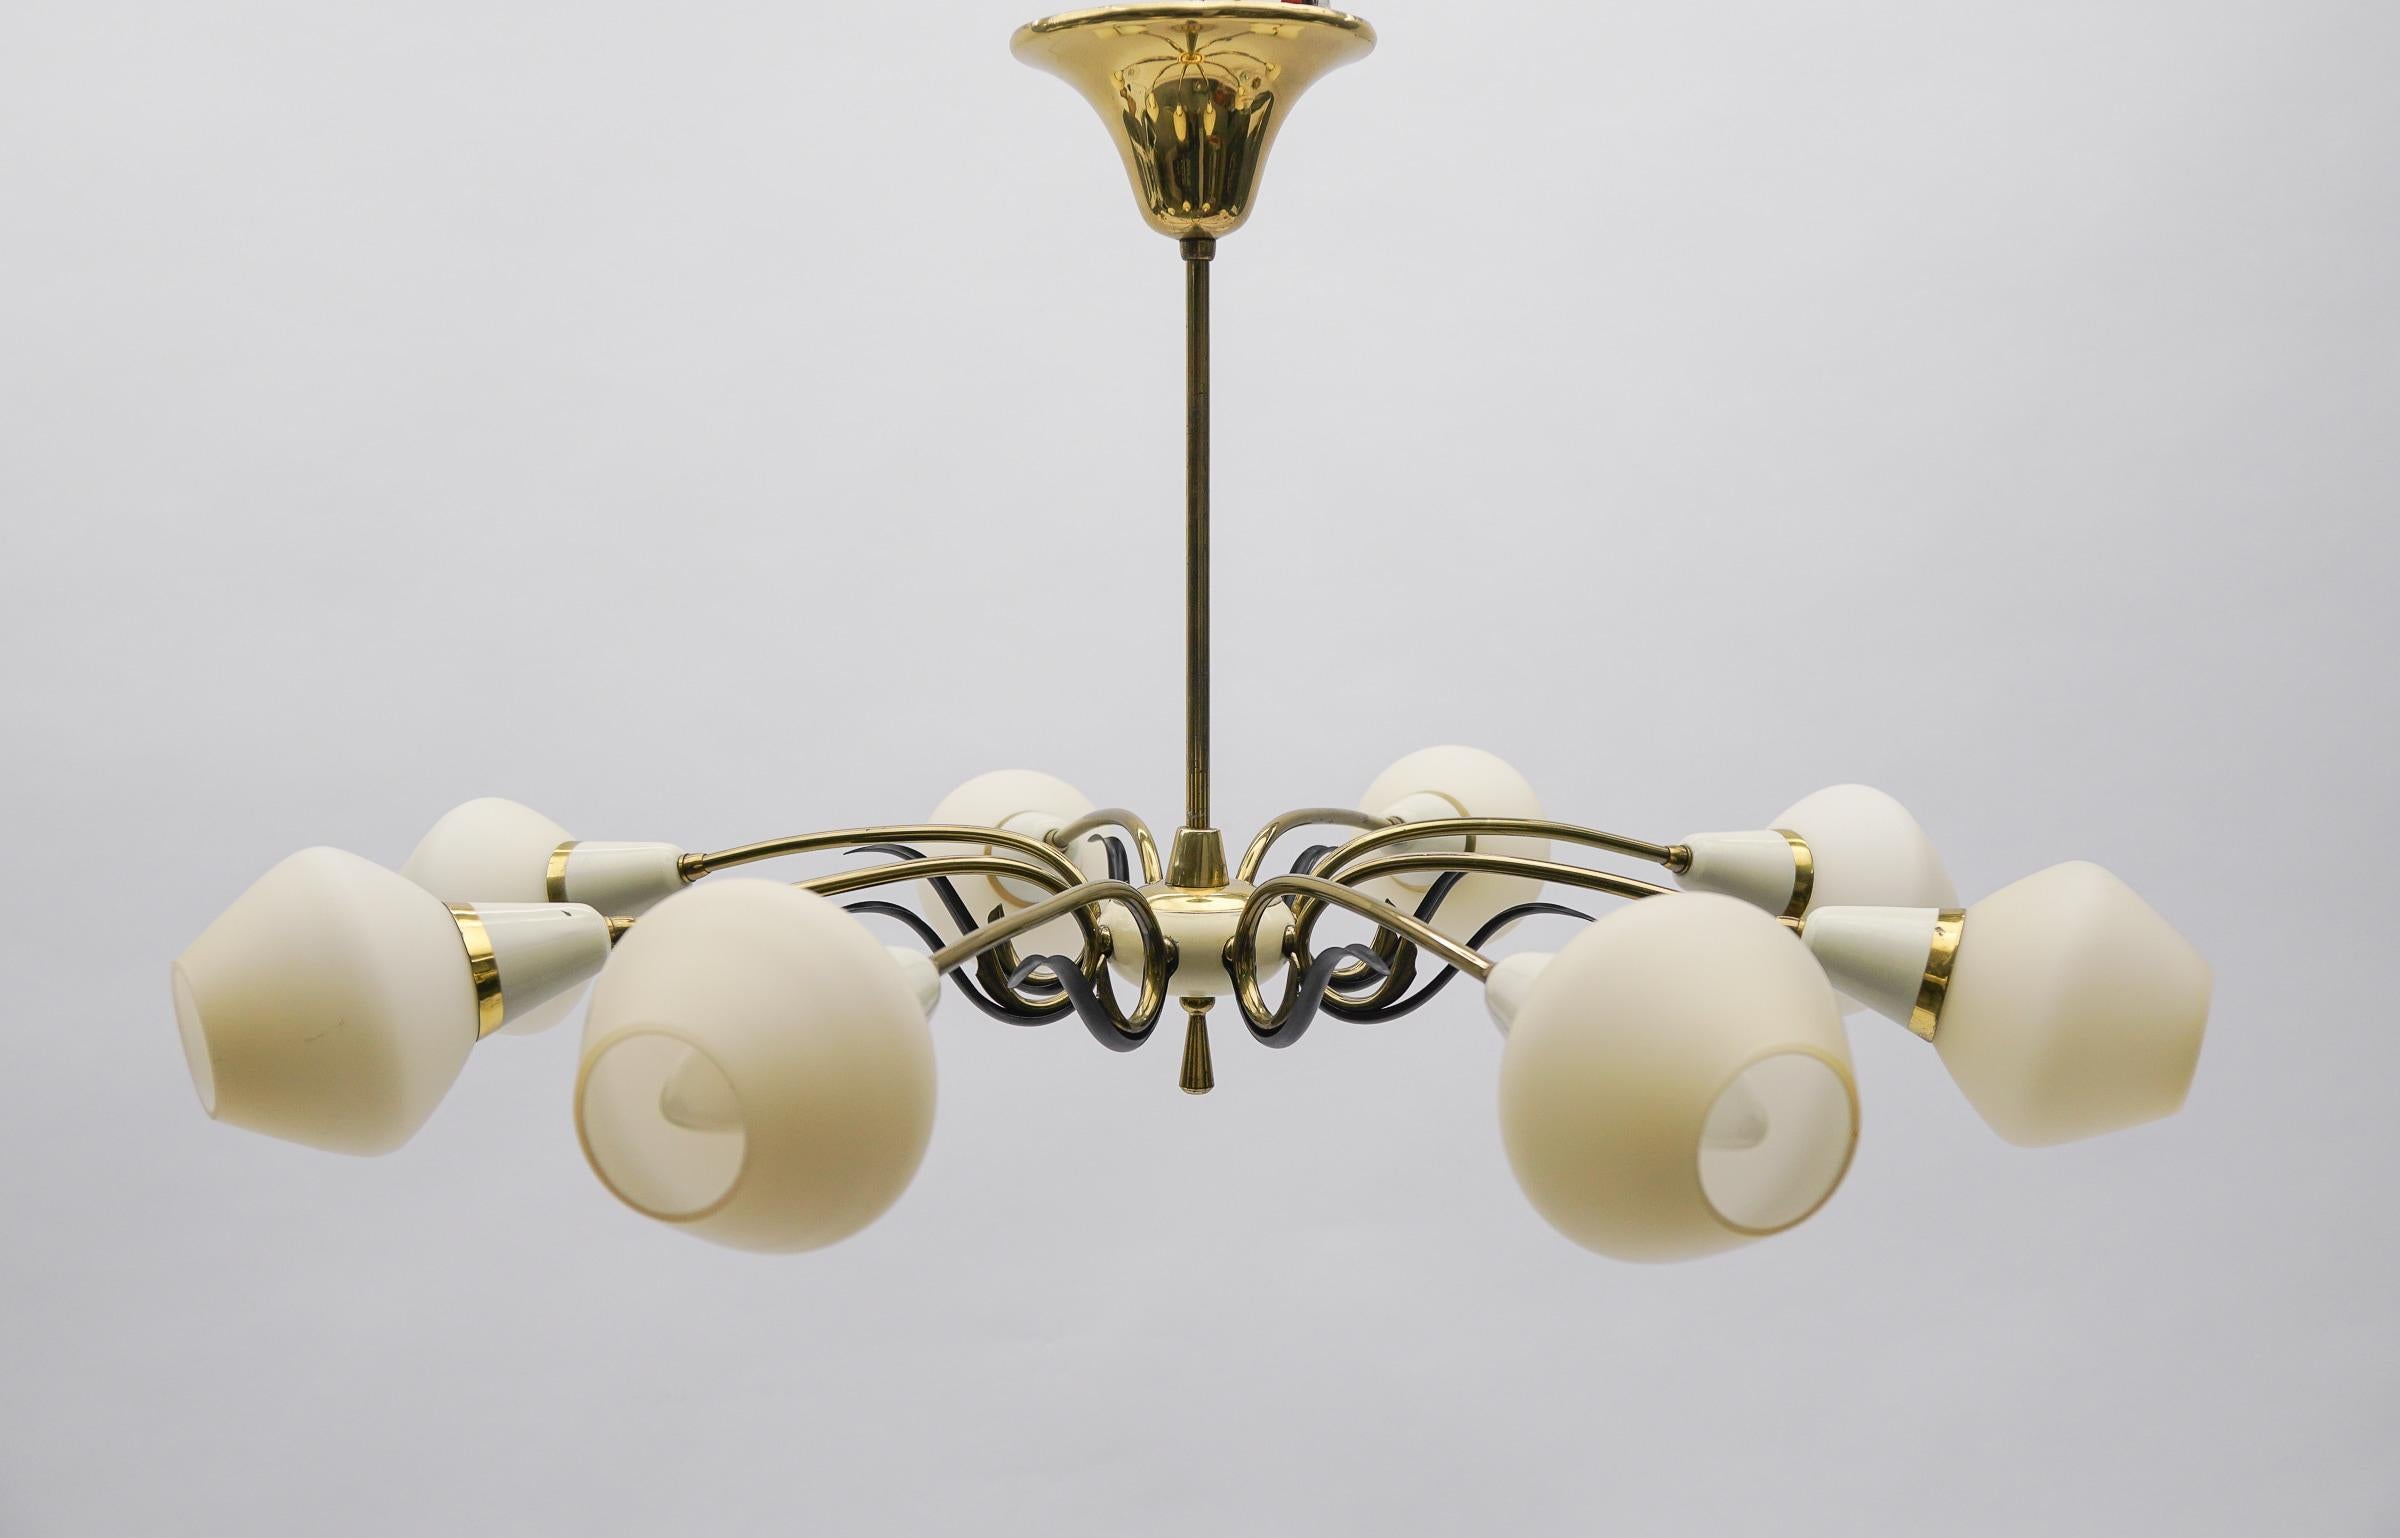 Metal Ceiling 8-Light Sputnik Lamp in the Style of Arteluce, Italy 1950s For Sale